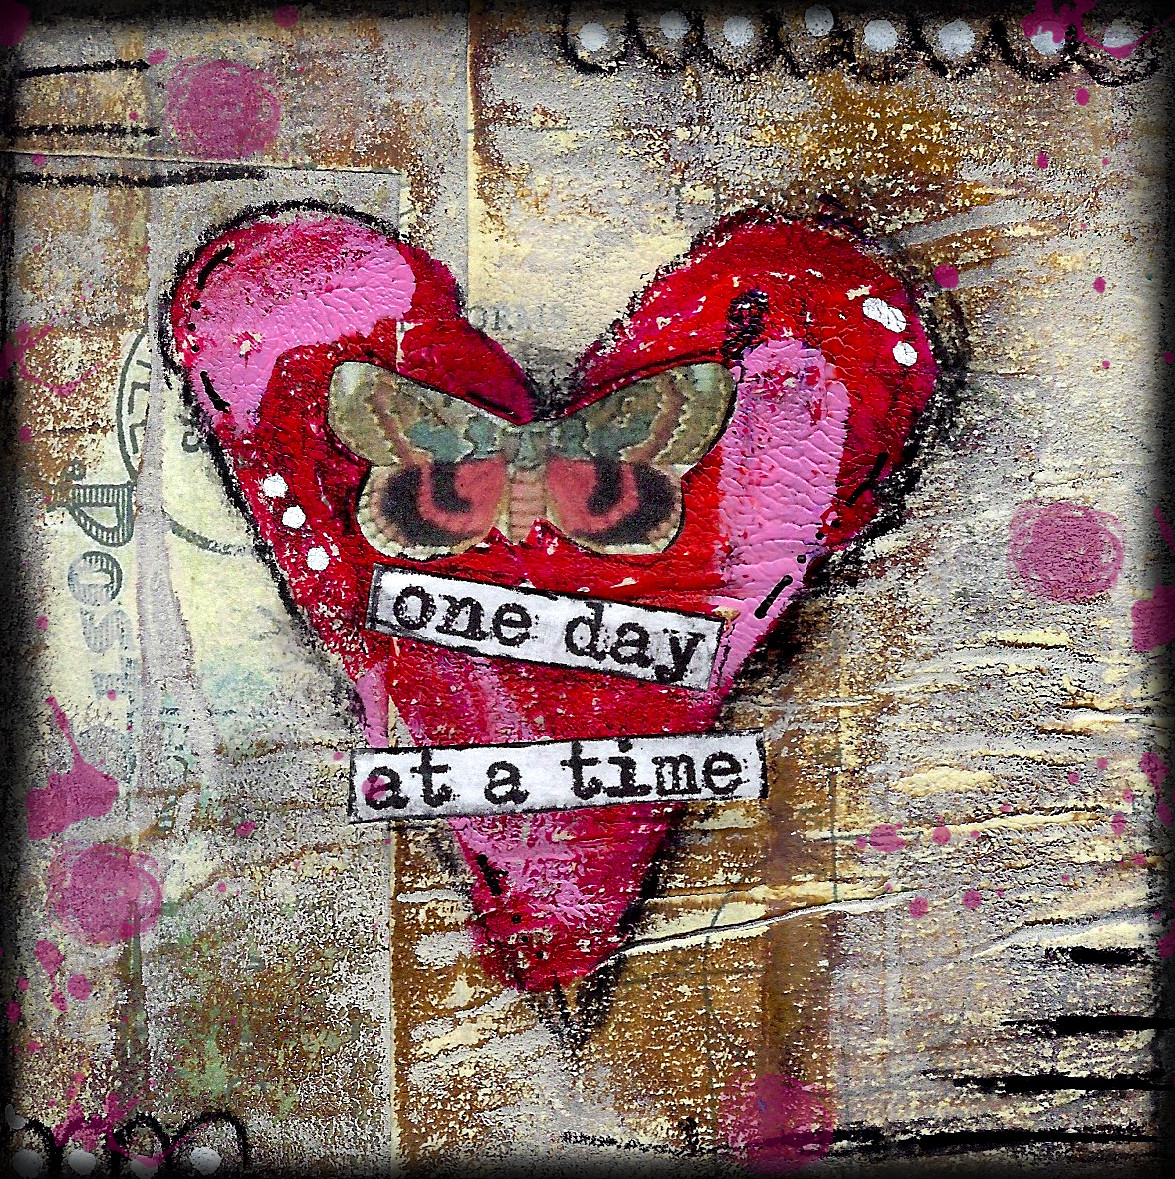 Giving hearts "One day at a Time" Print on wood